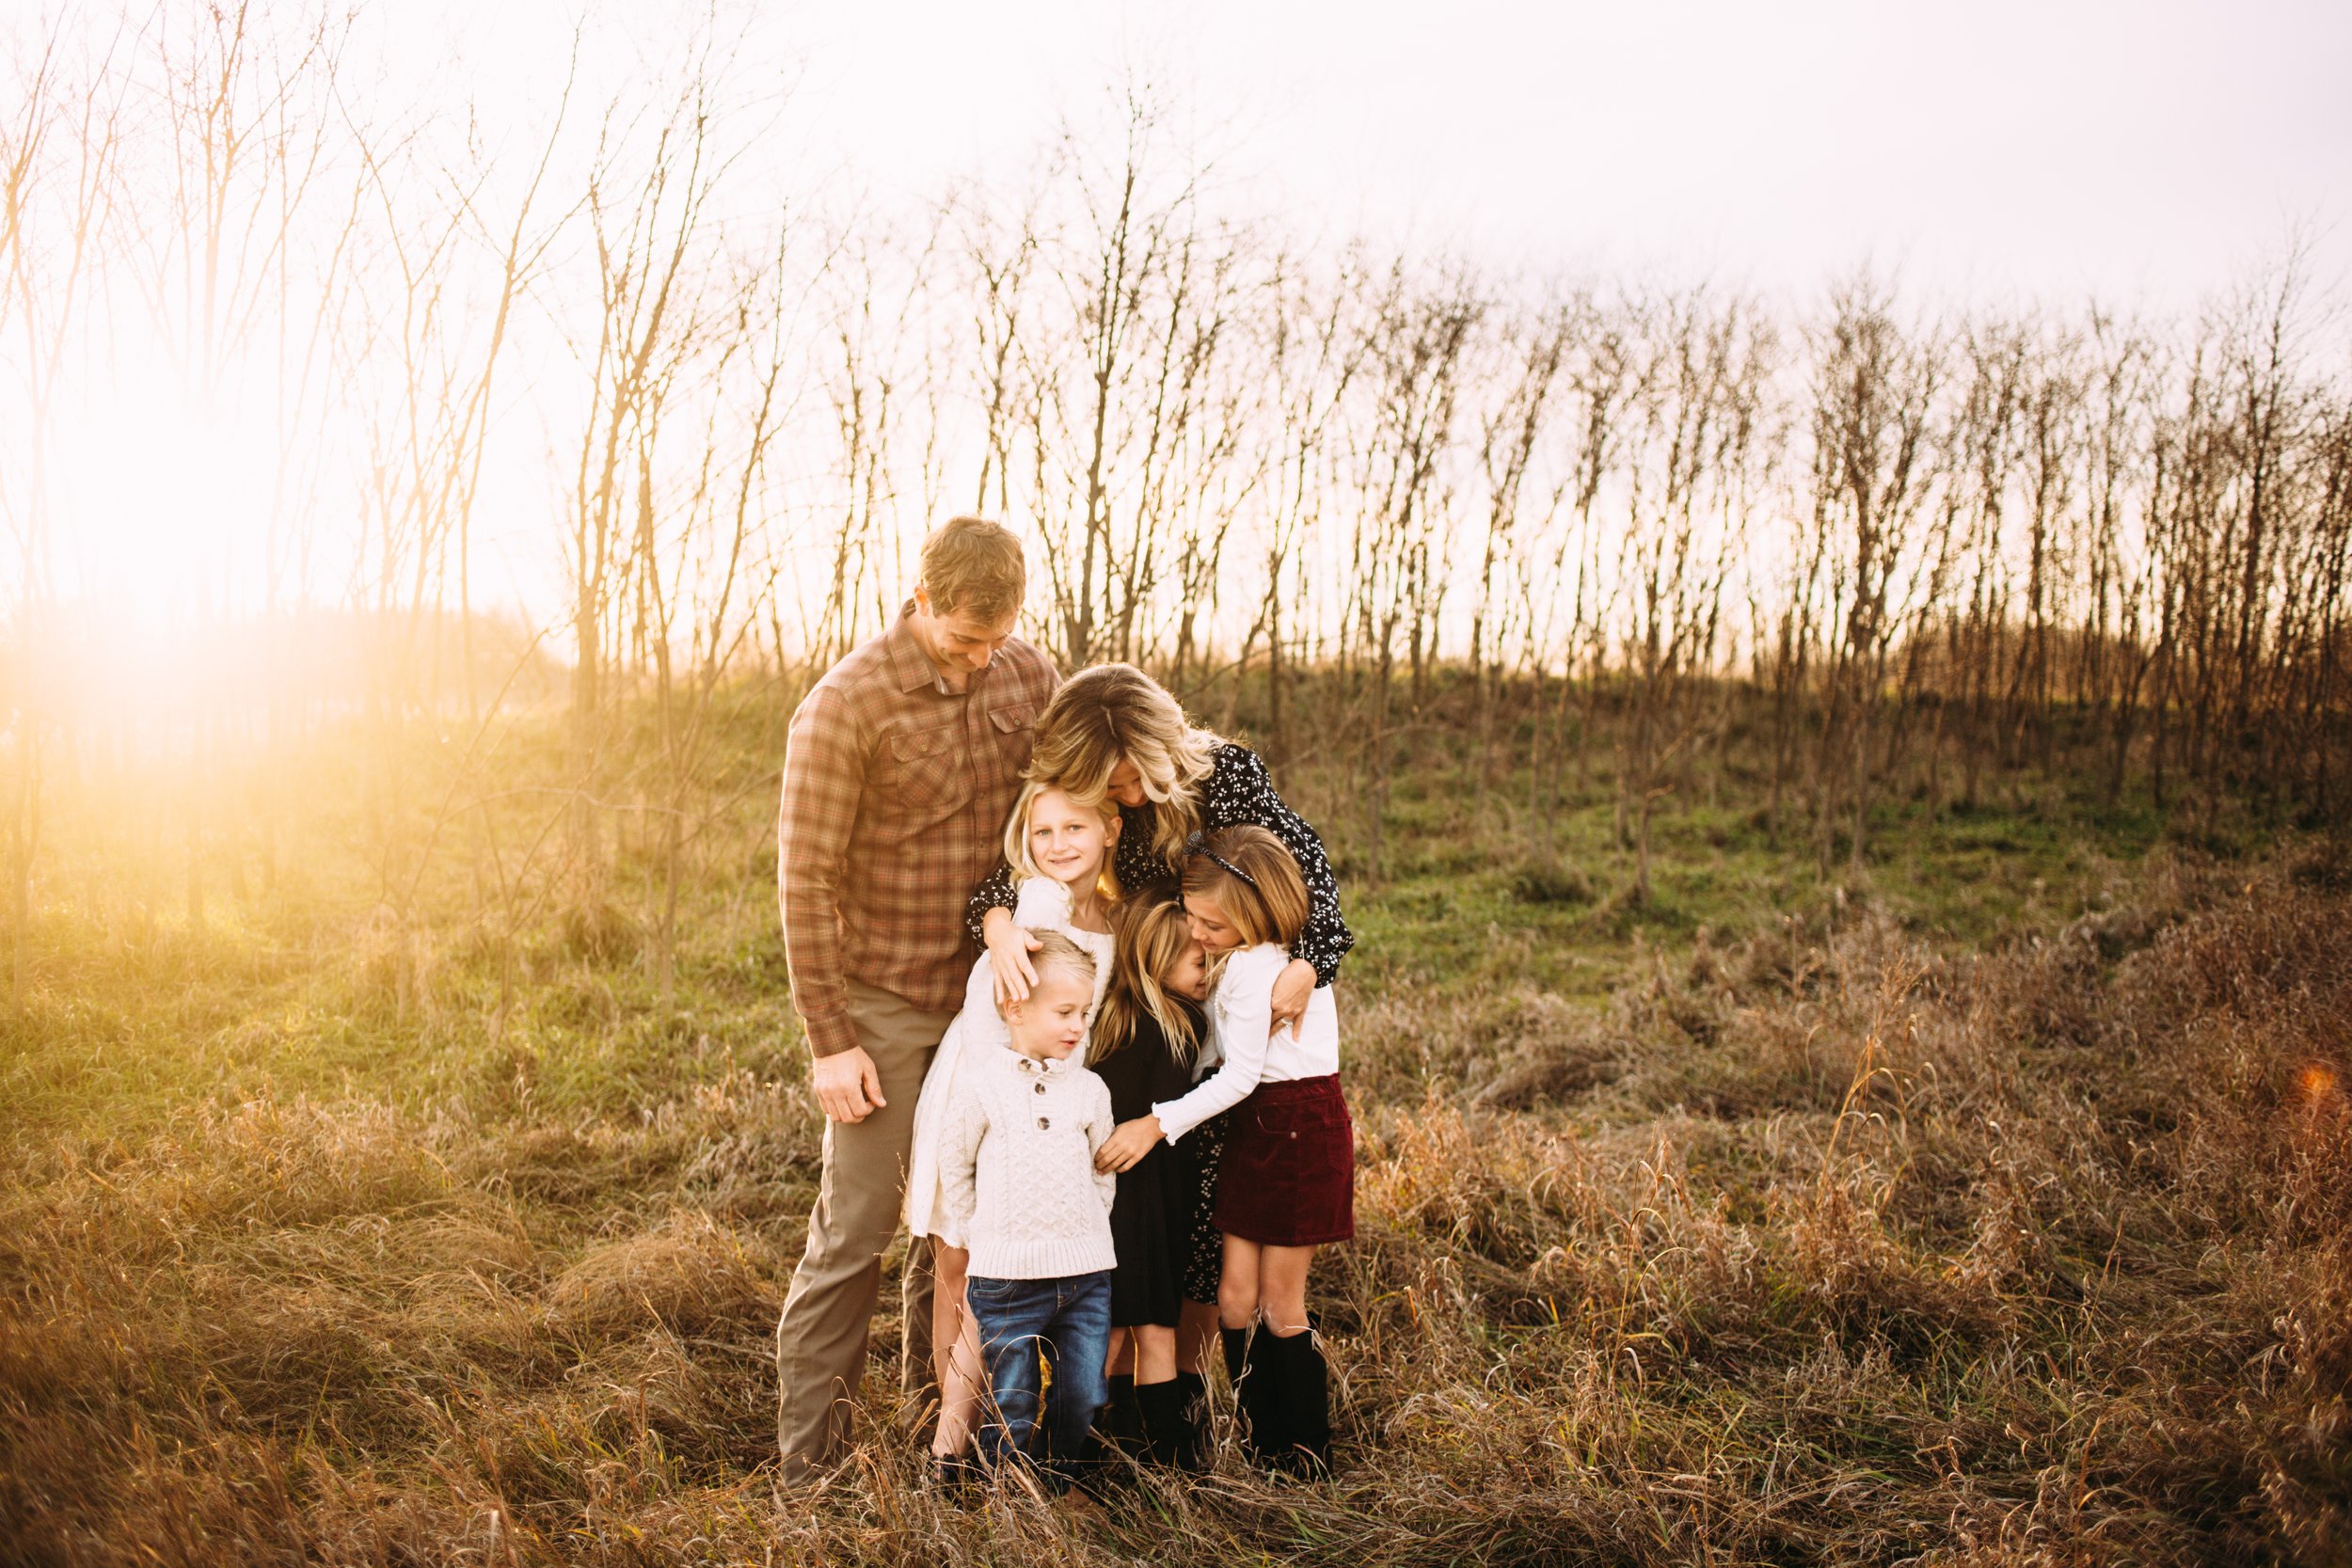  Teala Ward Photography captures a family portrait with a sunburst behind them as they hug one another. hugging family sunburst #TealaWardPhotography #TealaWardFamilies #StarvedRockStatePark #BuffaloRockPhotographers #UticaIllinoisphotographers 